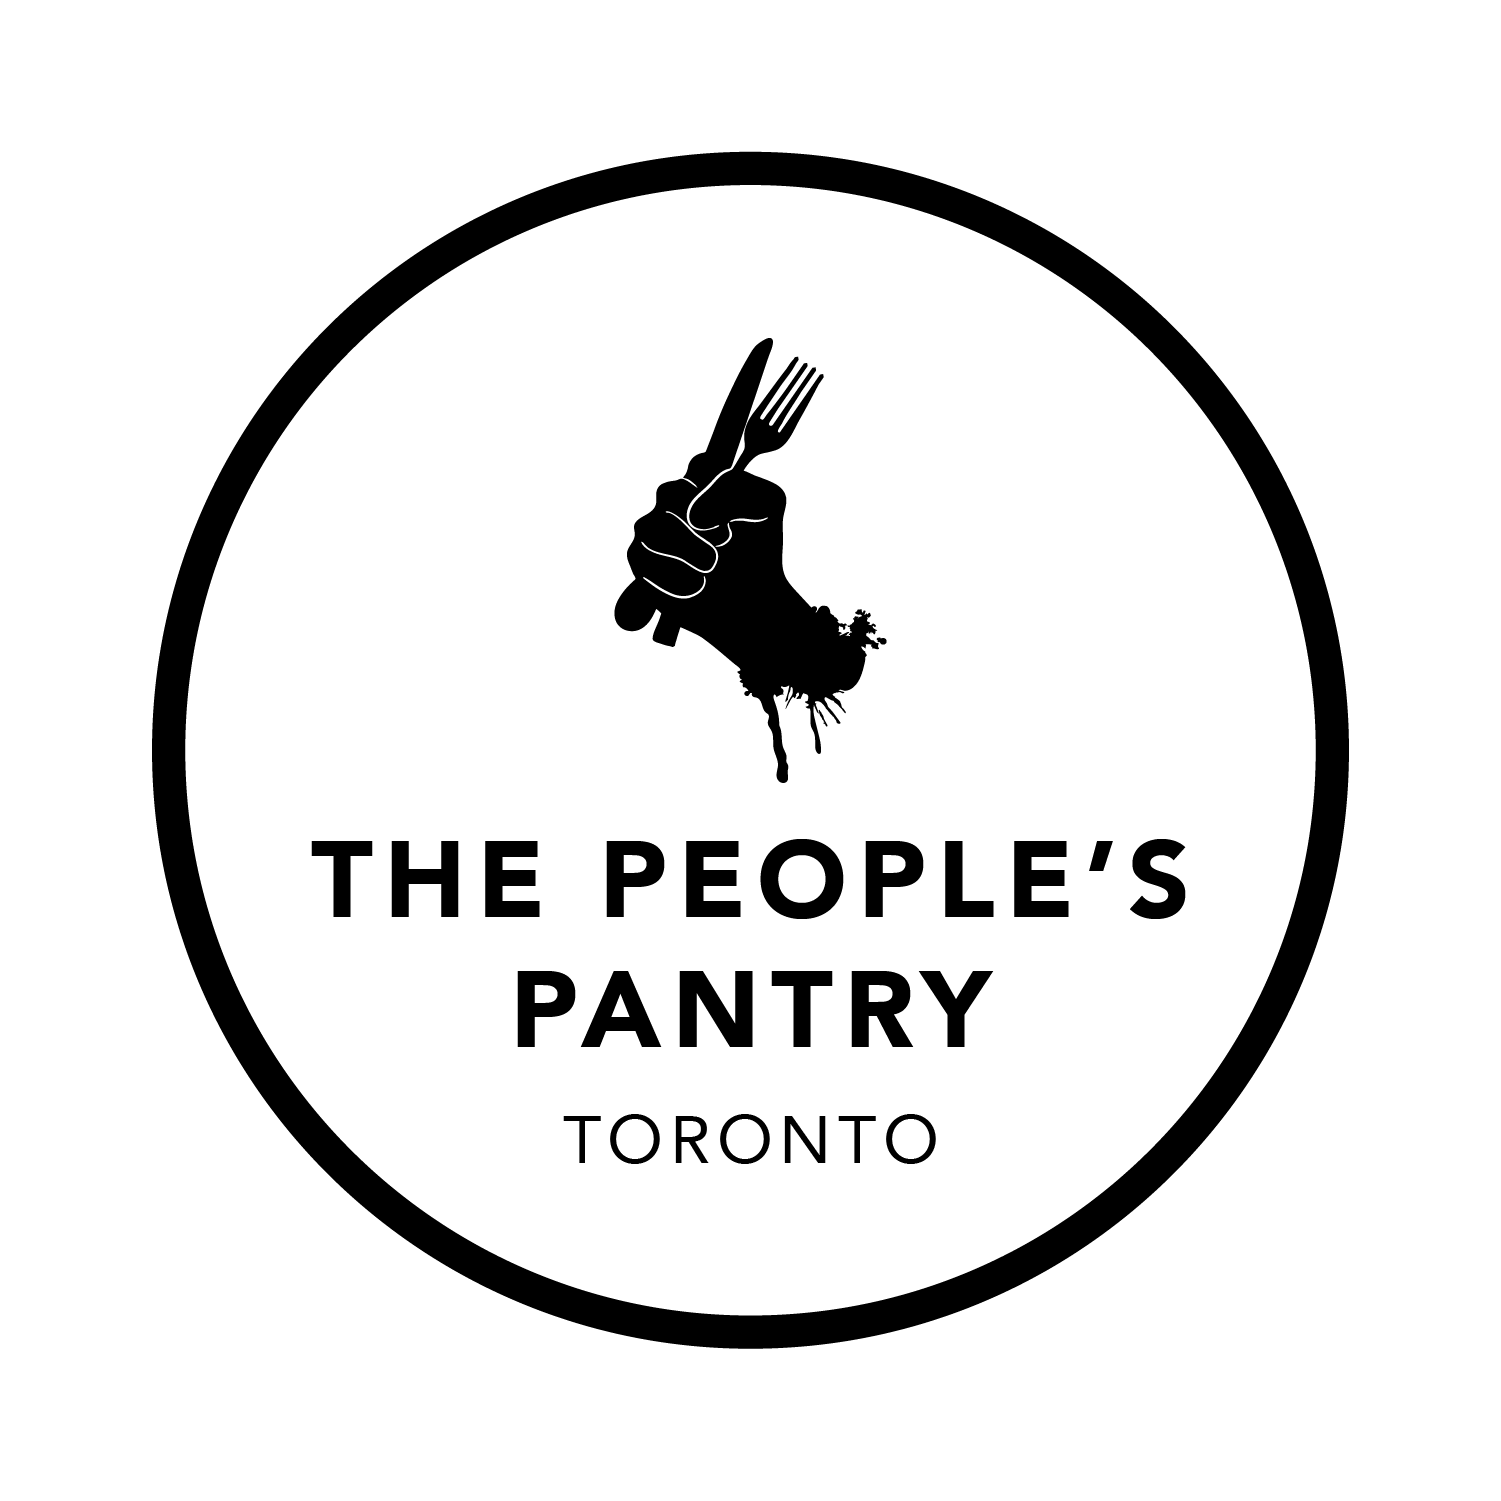 The People's Pantry logo, a fist clutching fork and knife.